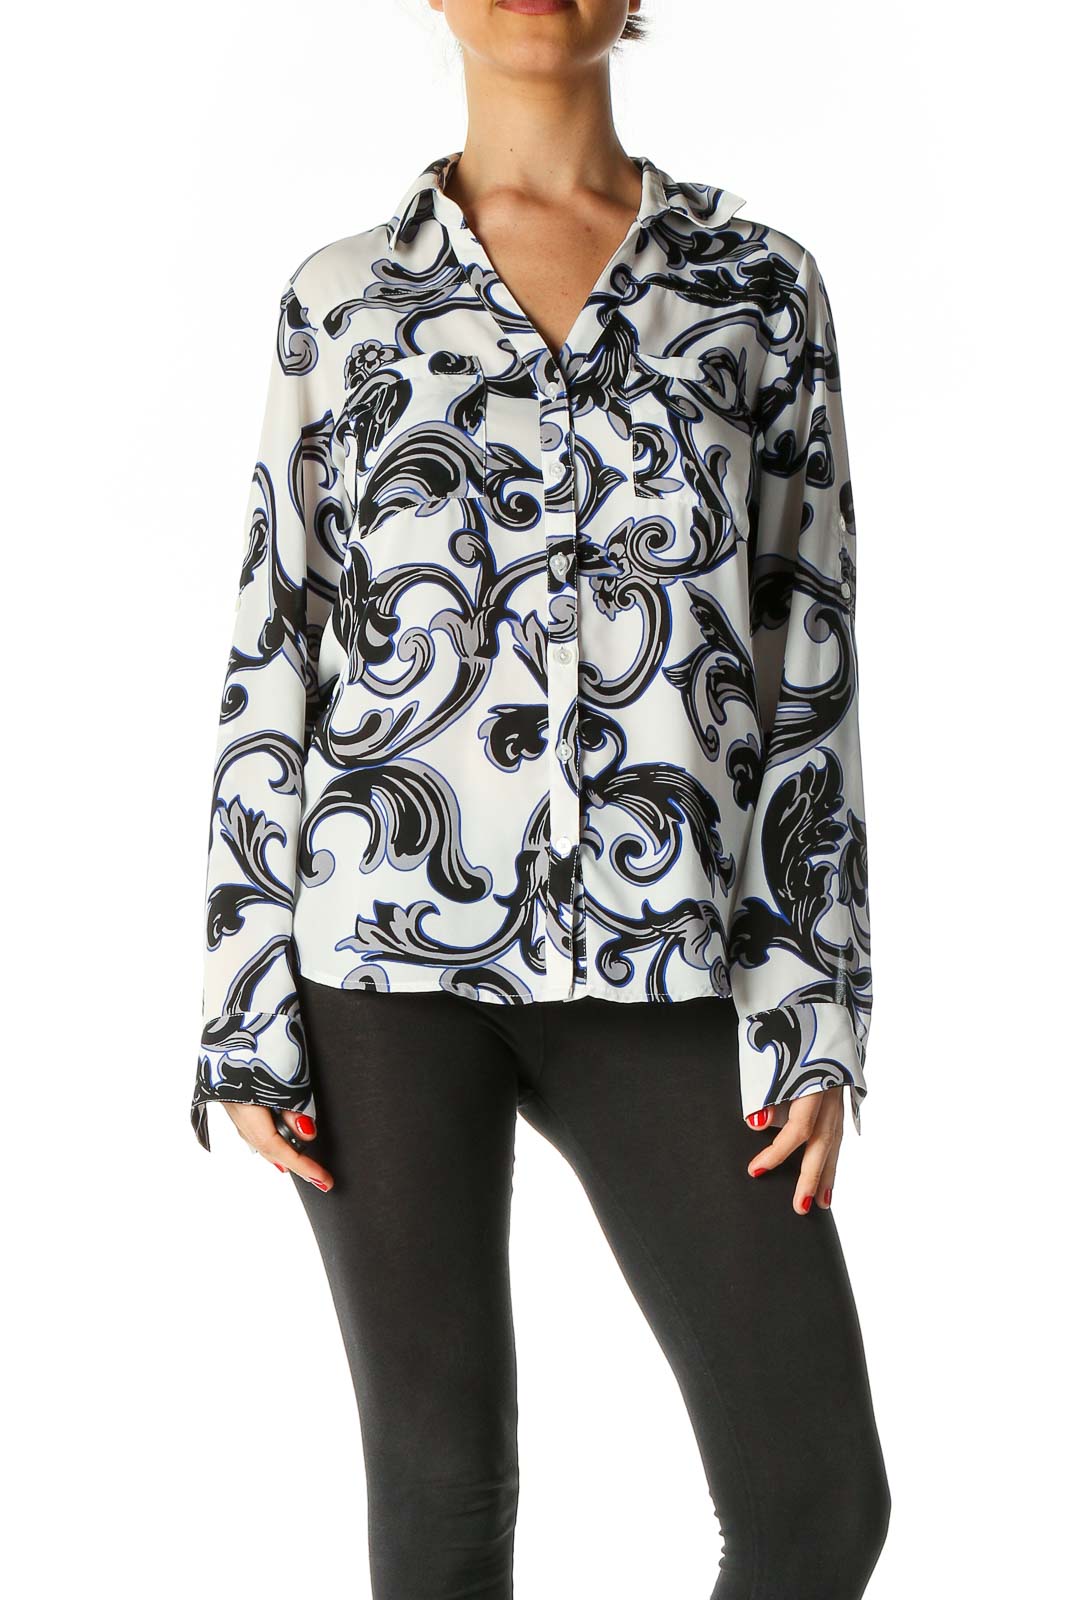 White Paisley Casual Blouse Front